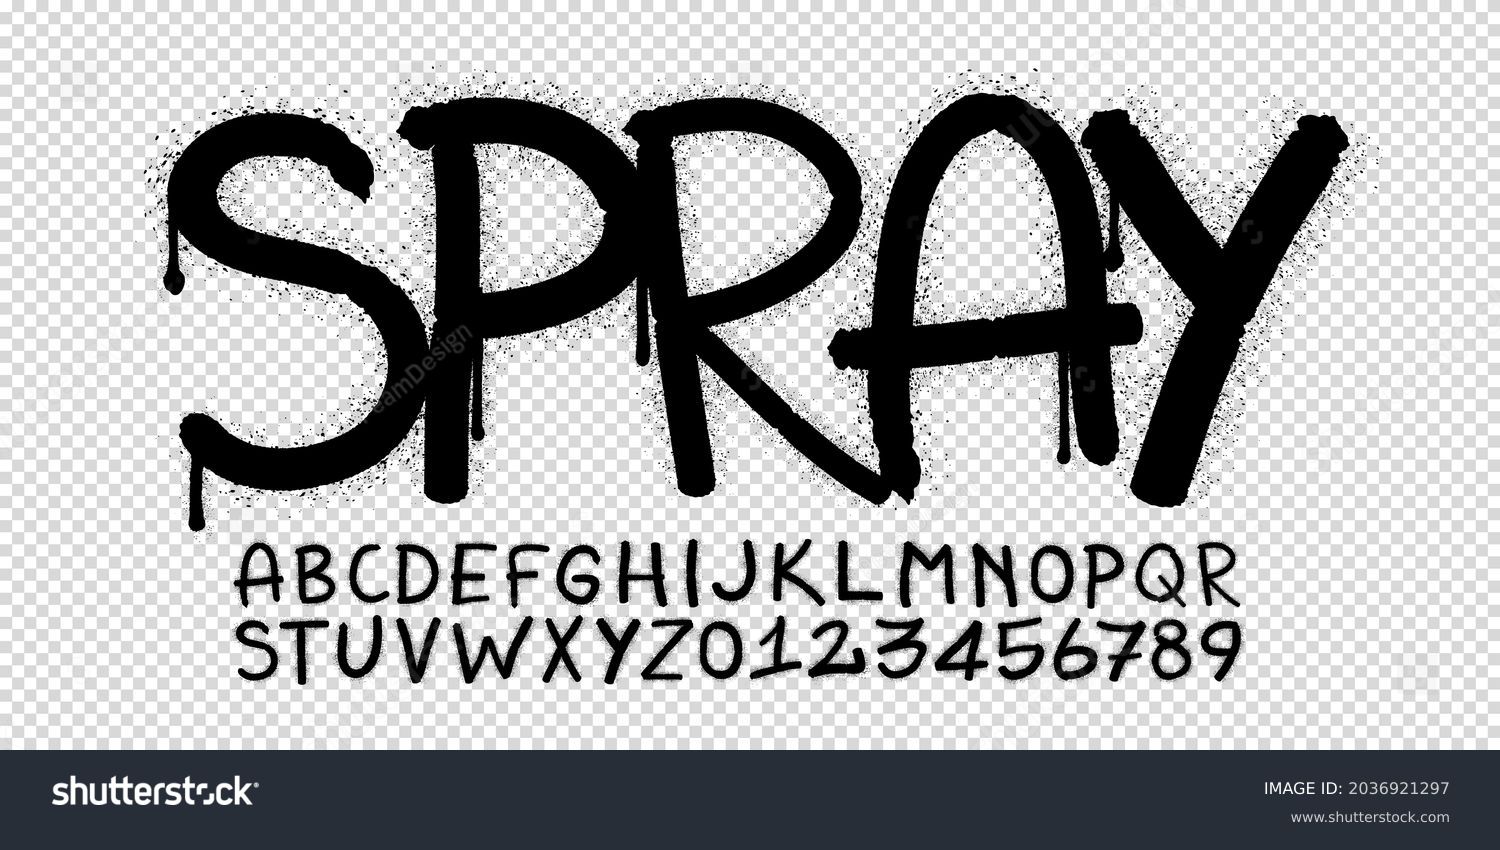 SVG of Realistic spray graffiti paint font on transparent background in vector format svg